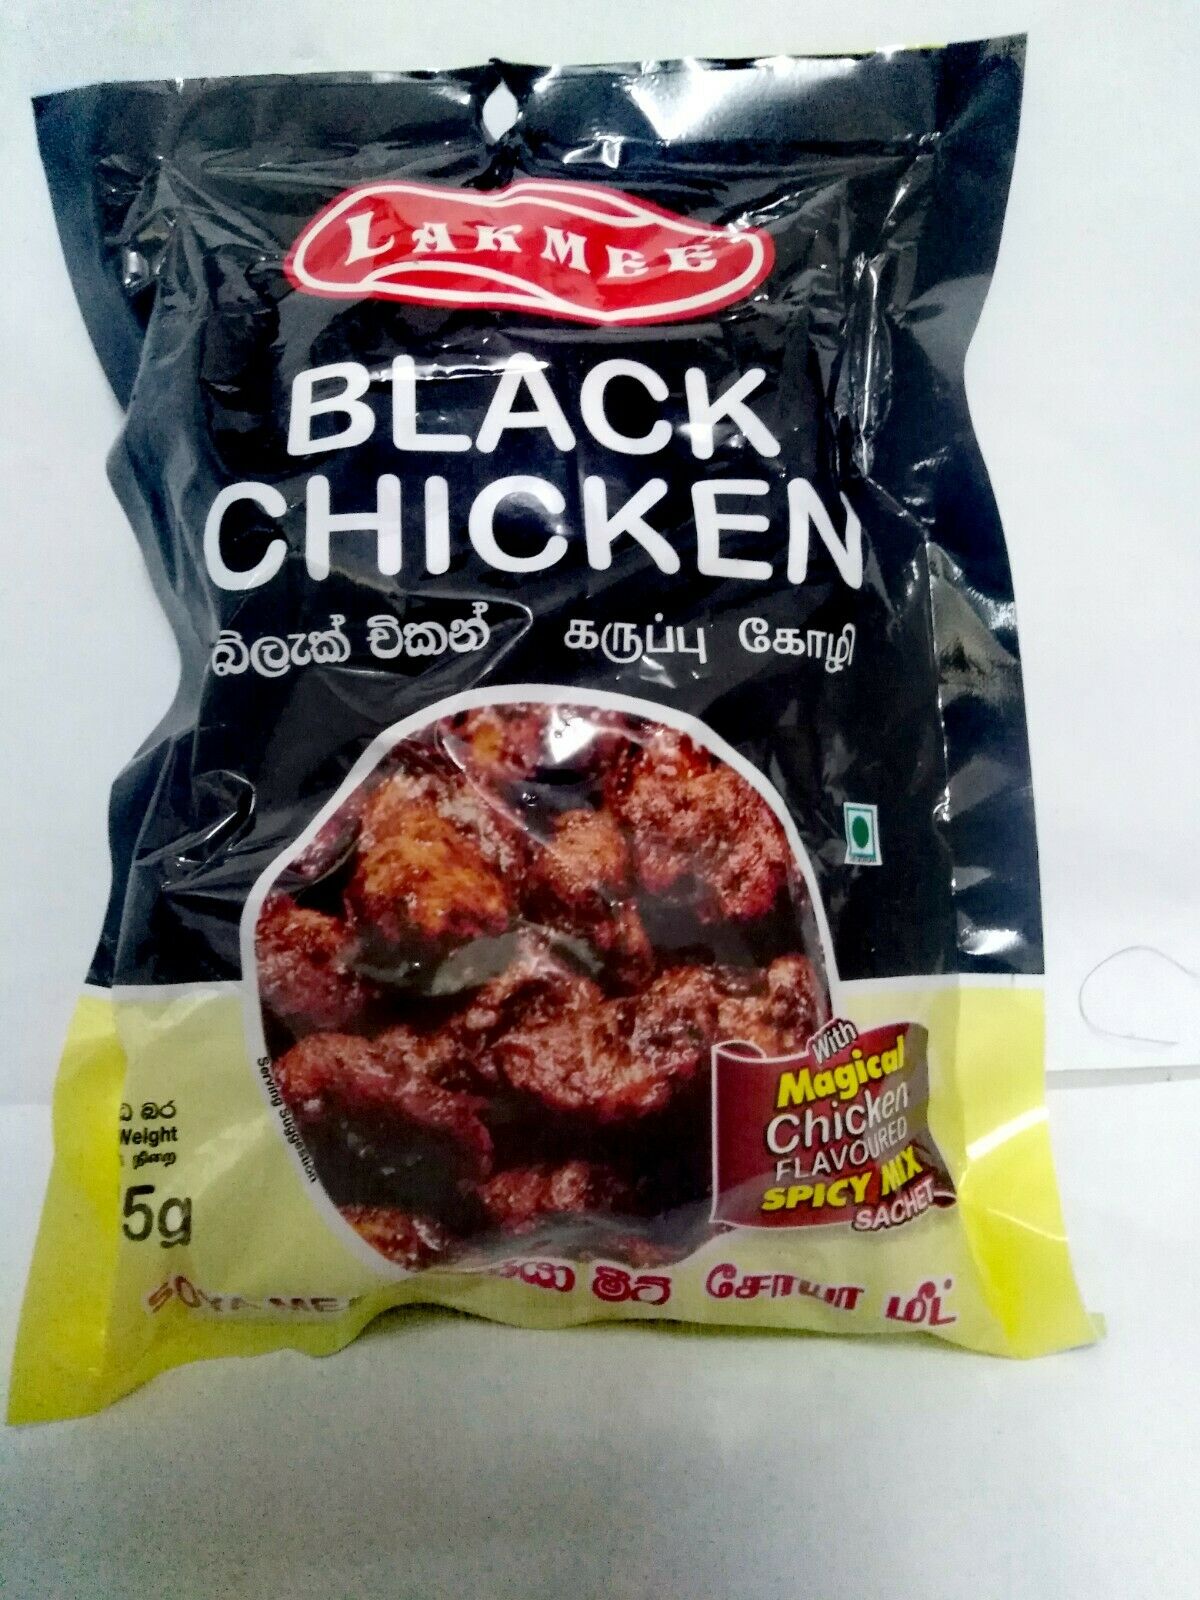 Lakmee Black Chicken Soya Meat 85g 100% Vegetarian With Natural Spicy Mix Sachet